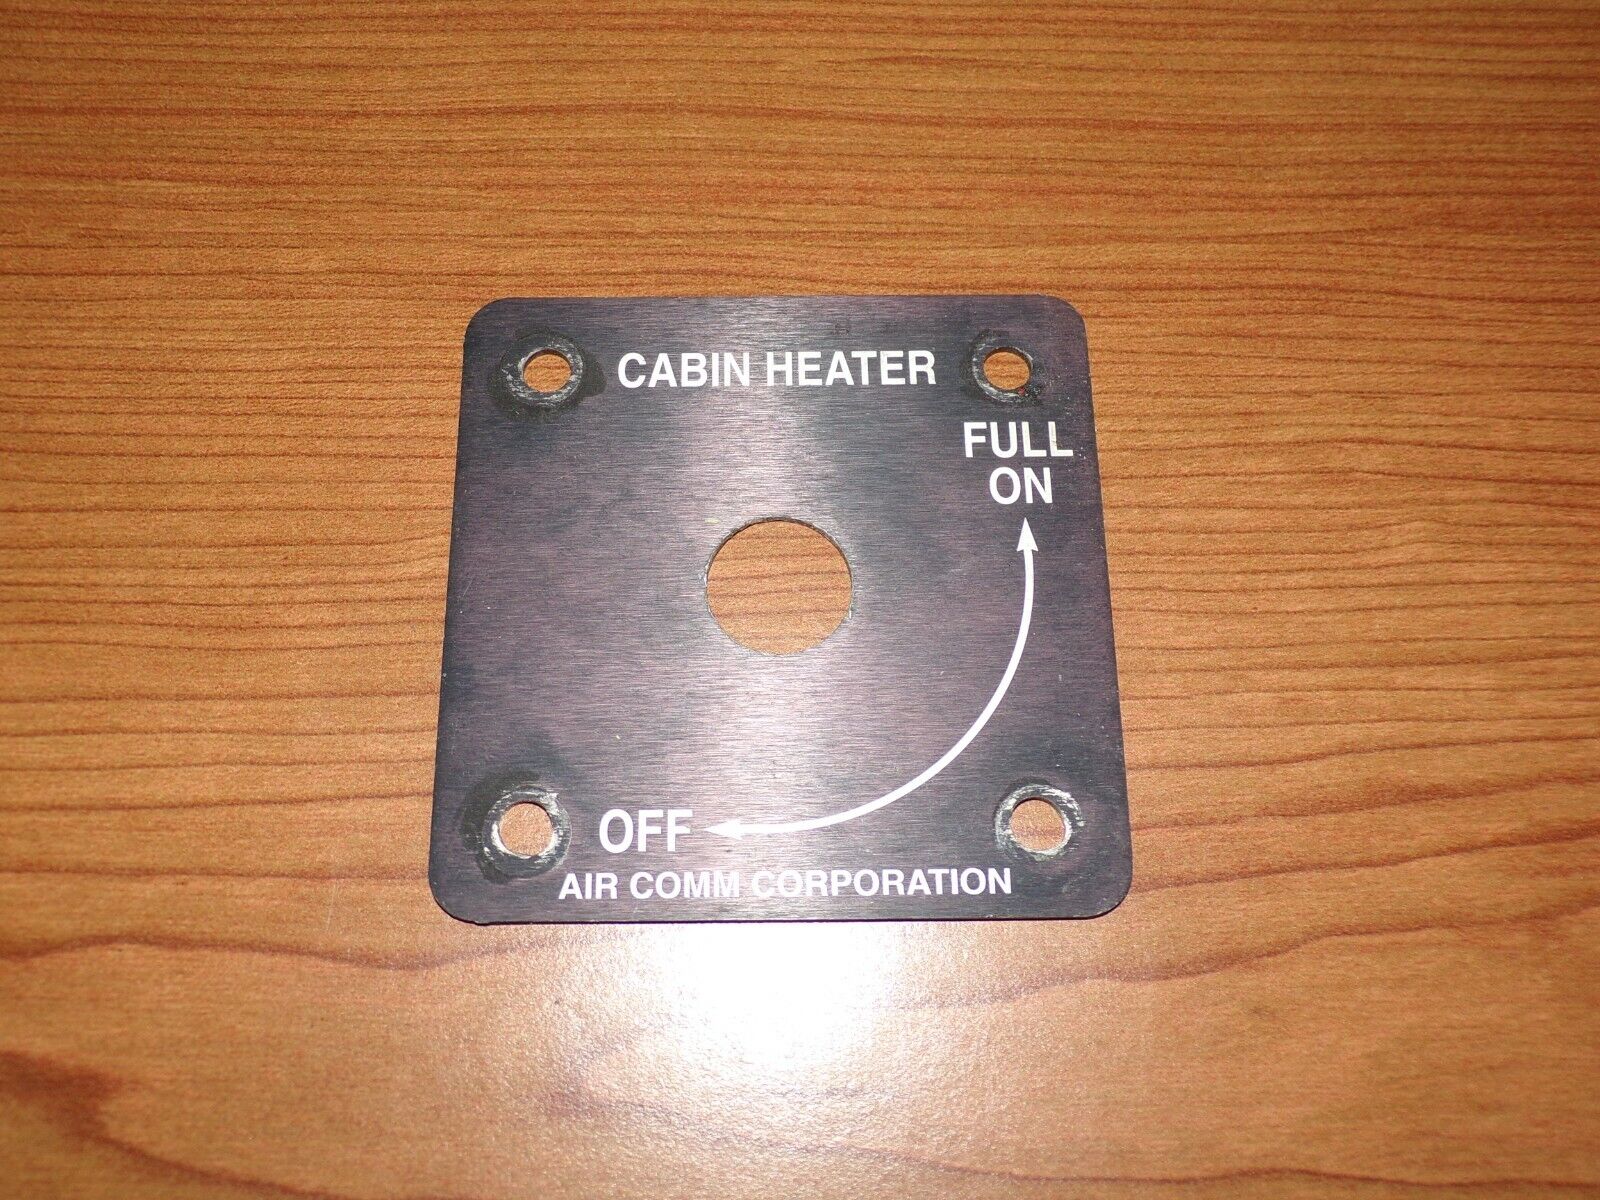 Air Comm Corp Cabin Heater Full On/Off  Metal Placard Plate